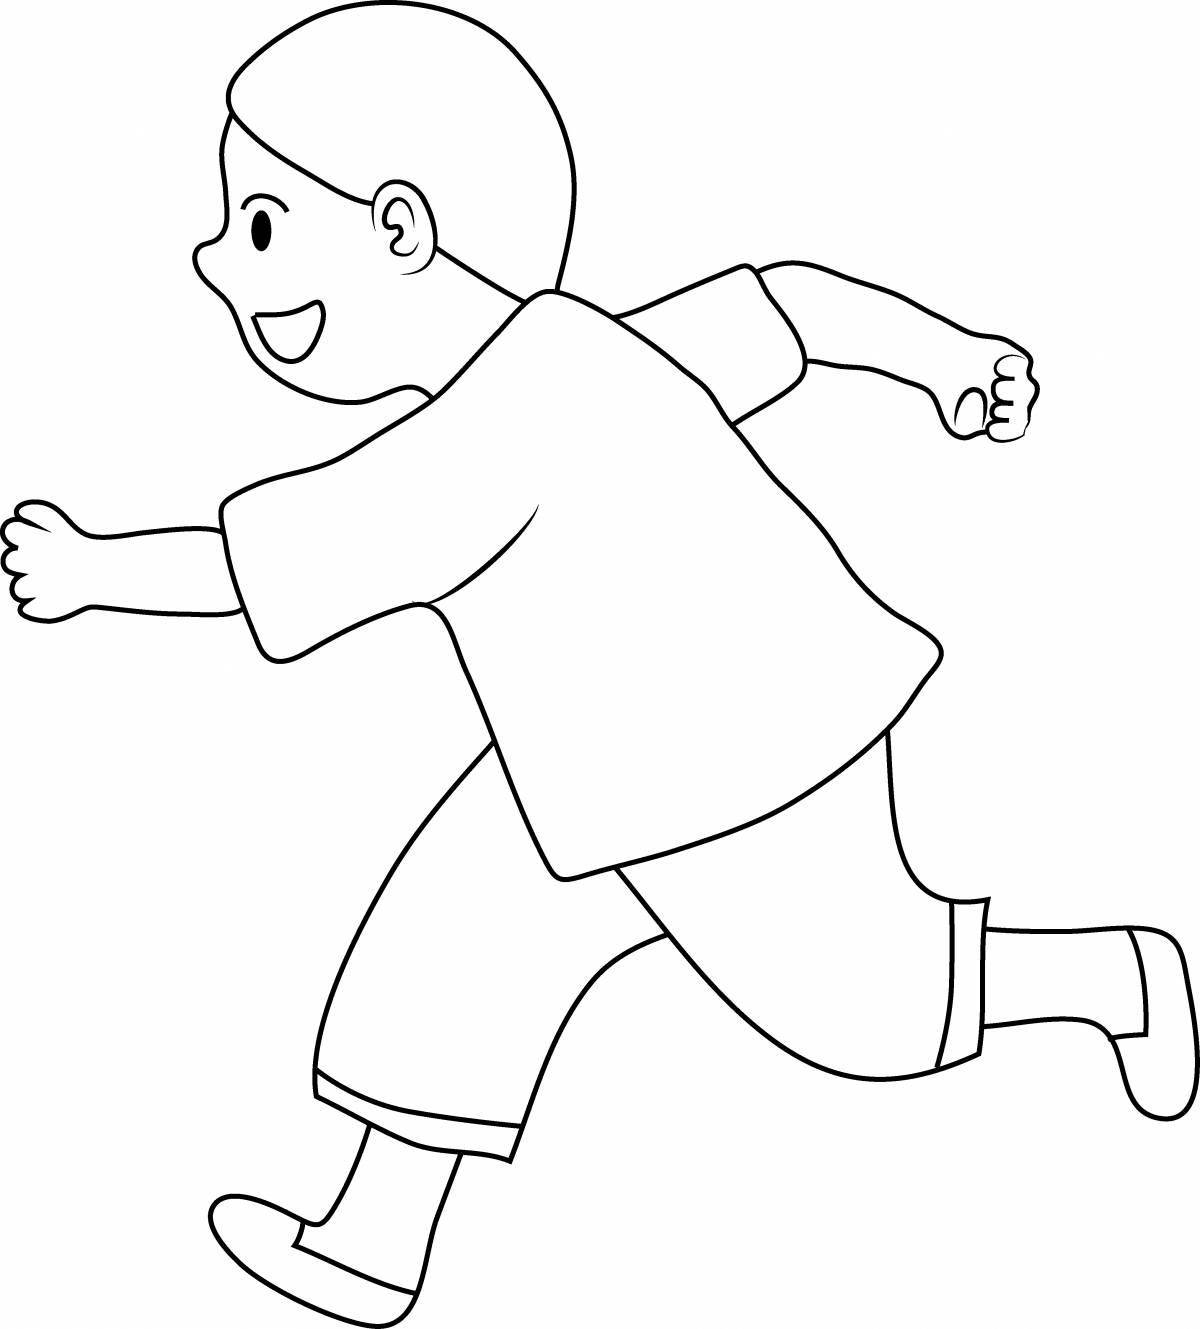 Colorful running coloring book